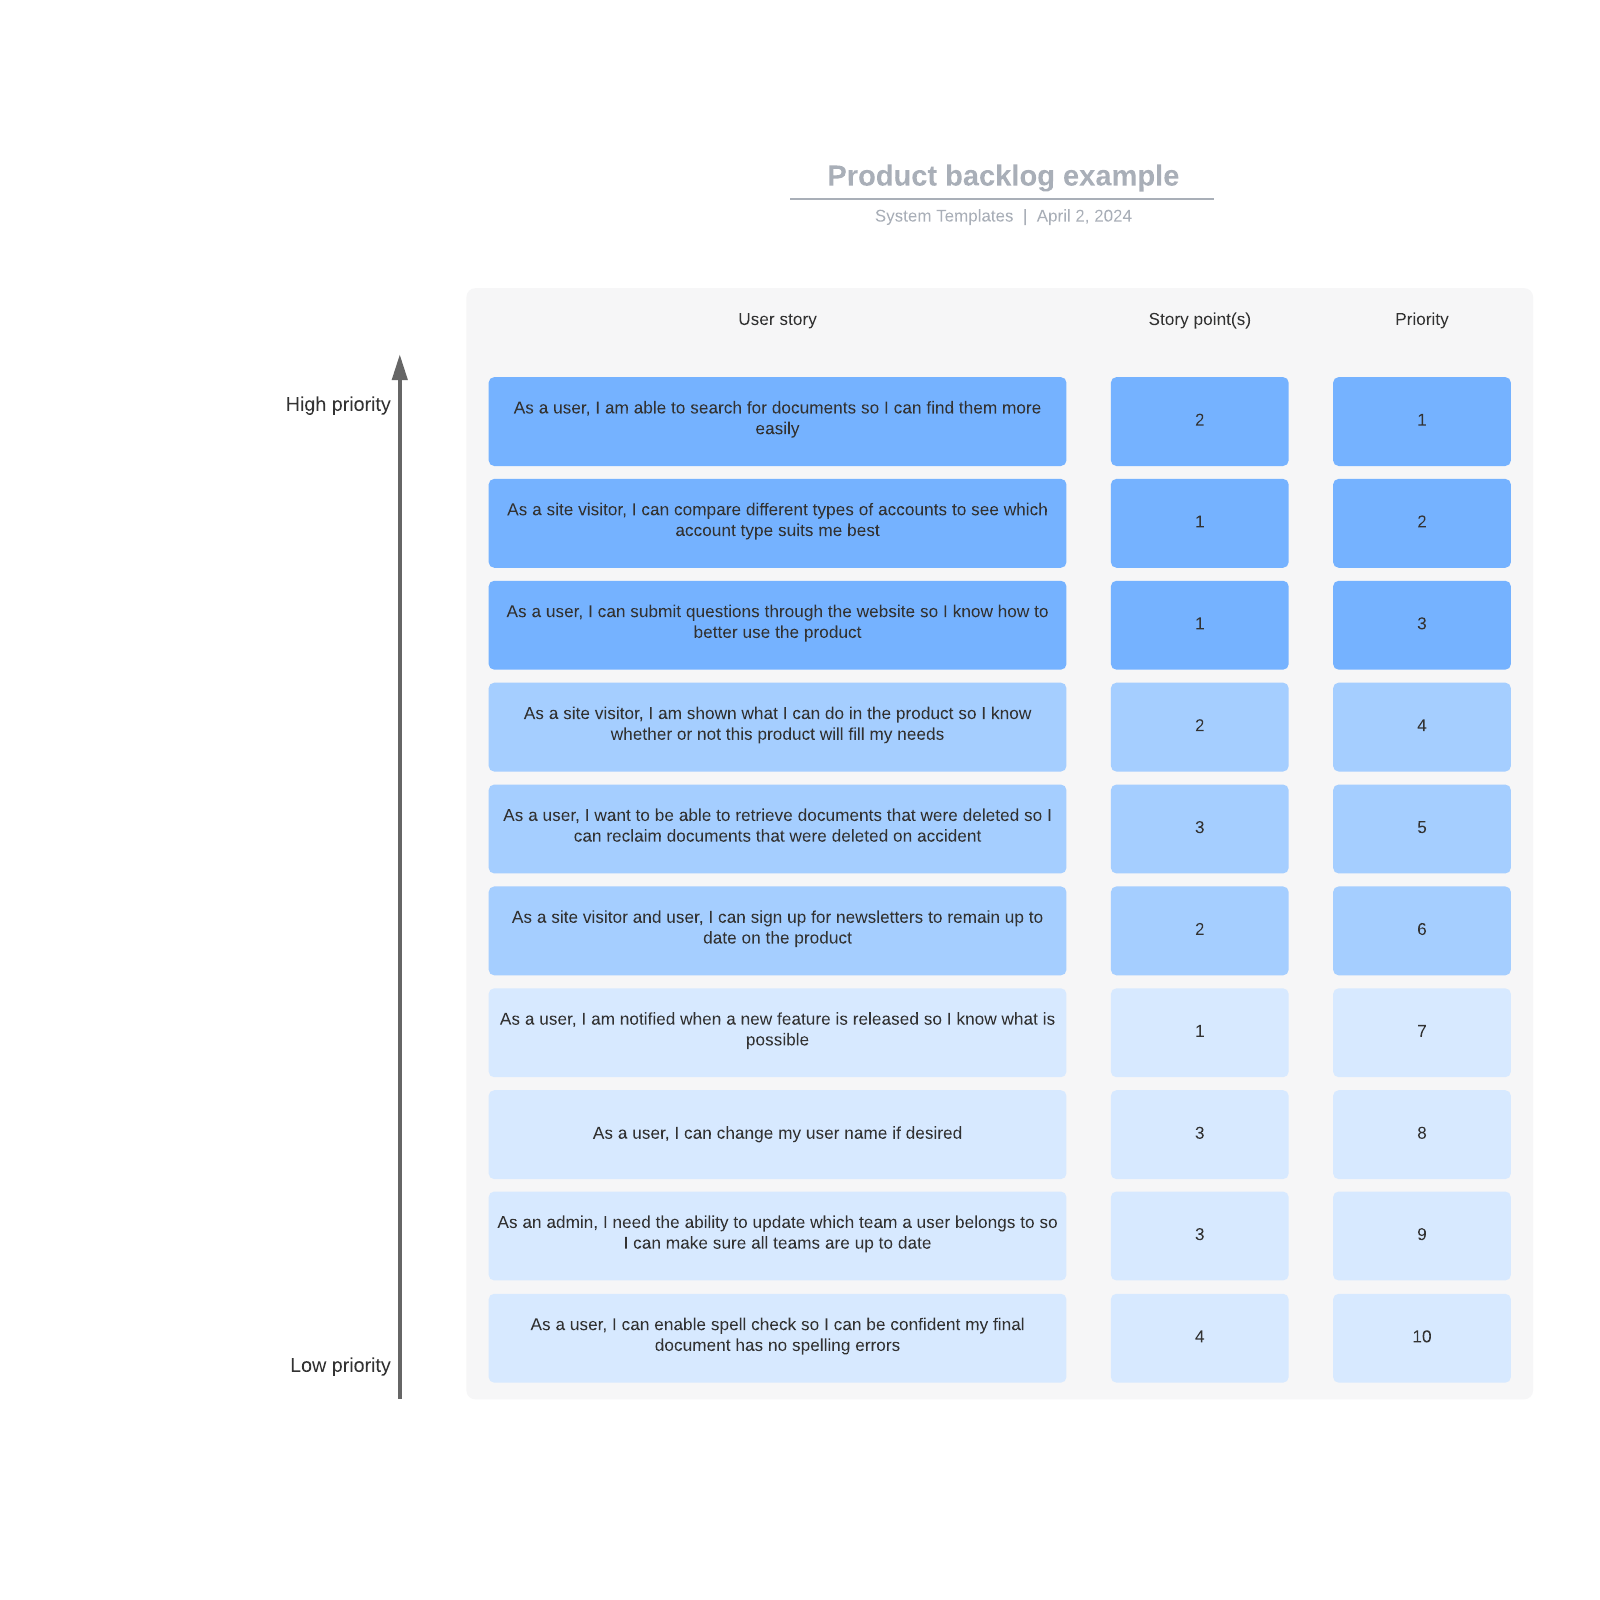 Product backlog example example